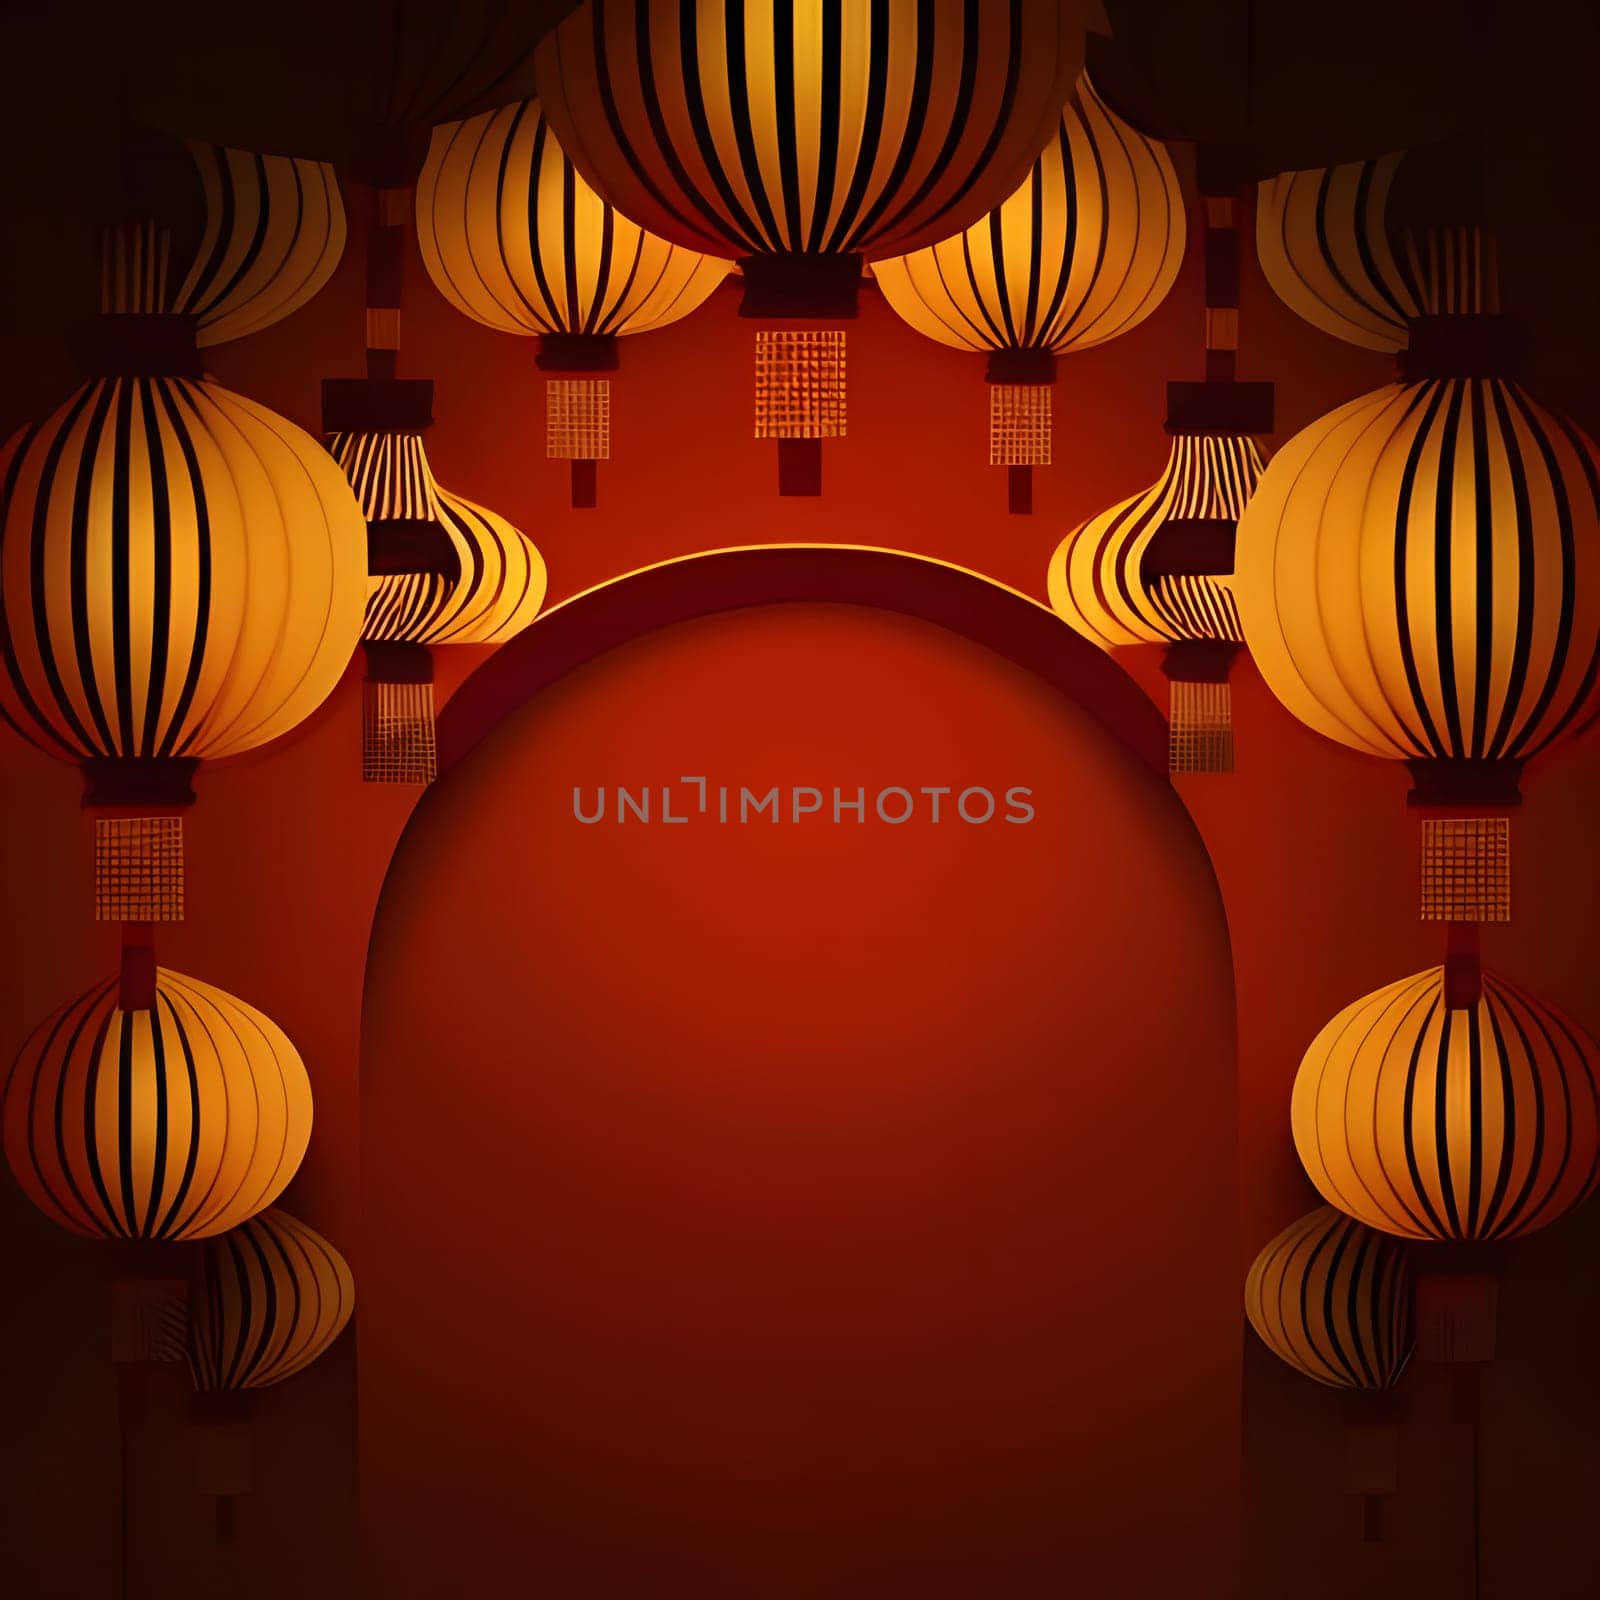 Around the Chinese lanterns in the middle, space for your own content frame. A time of celebration and resolutions. by ThemesS